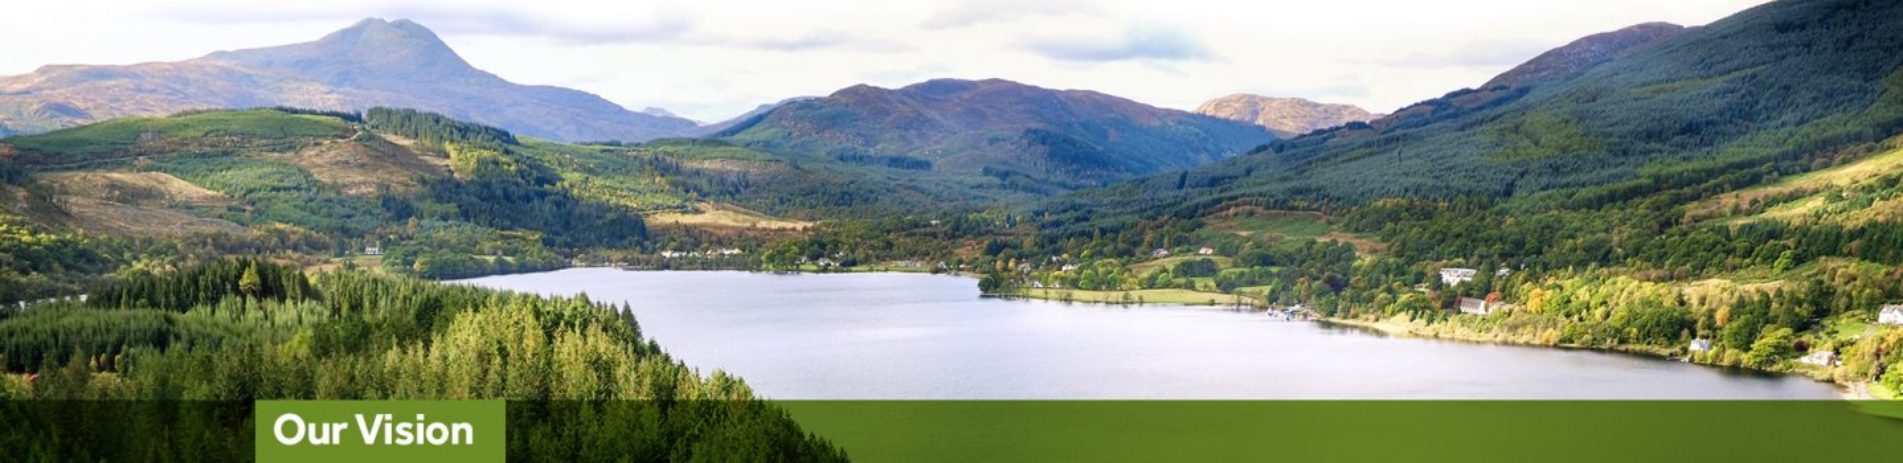 aerial-view-of-loch-ard-surrounded-by-forests-and-with-ben-lomond-towering-above-in-the-distance-with-green-banner-underneath-reading-our-vision